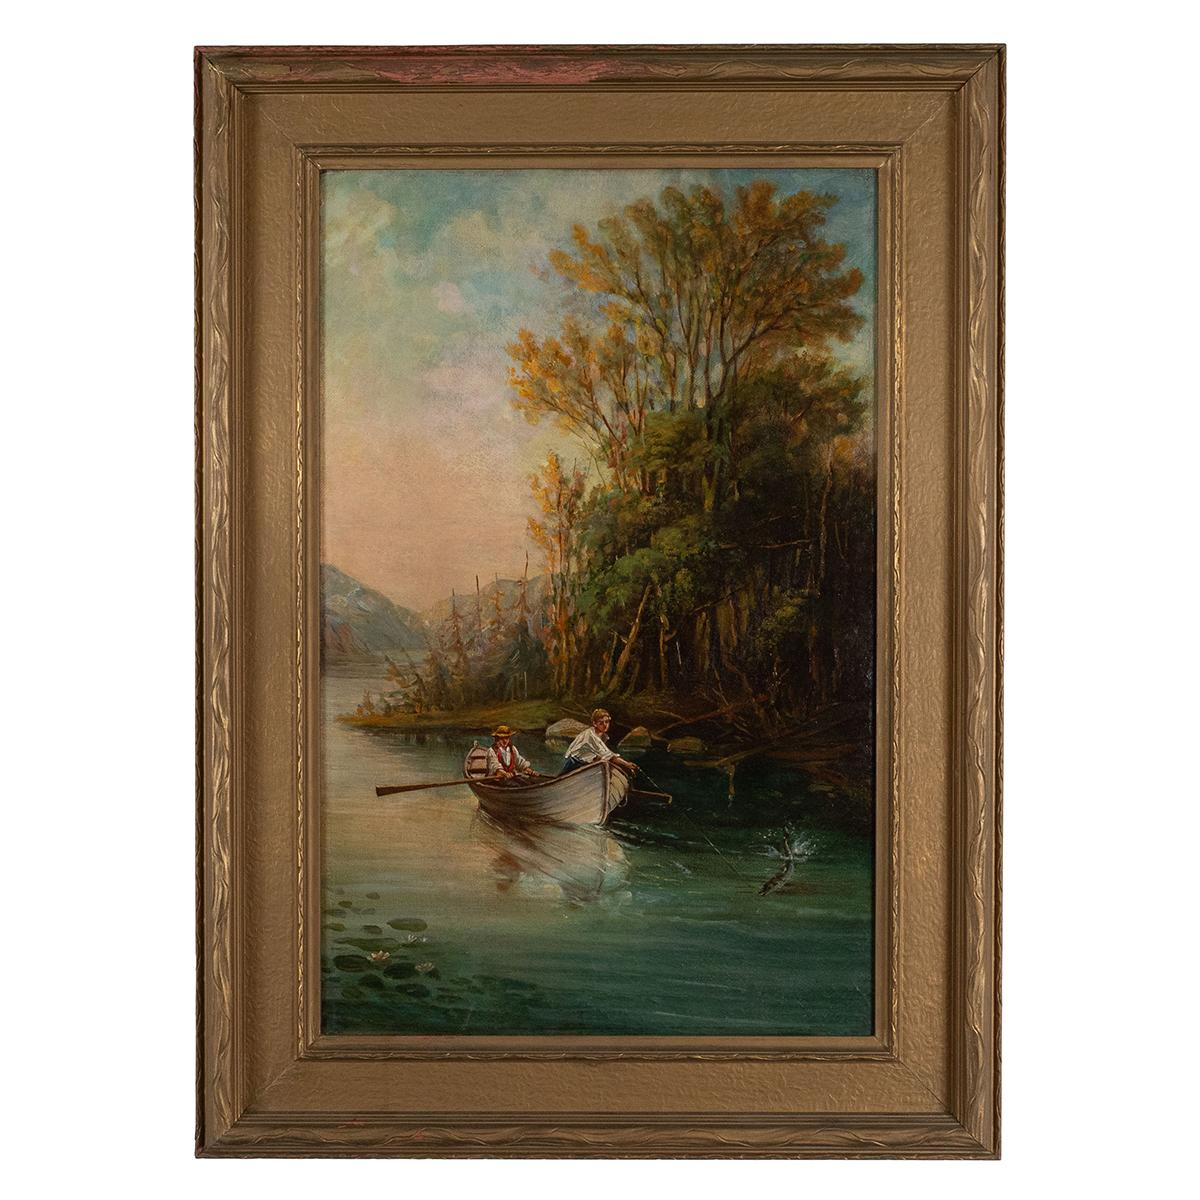 Vintage painting depicting a river boat fishing scene with weathered painted wood frame.